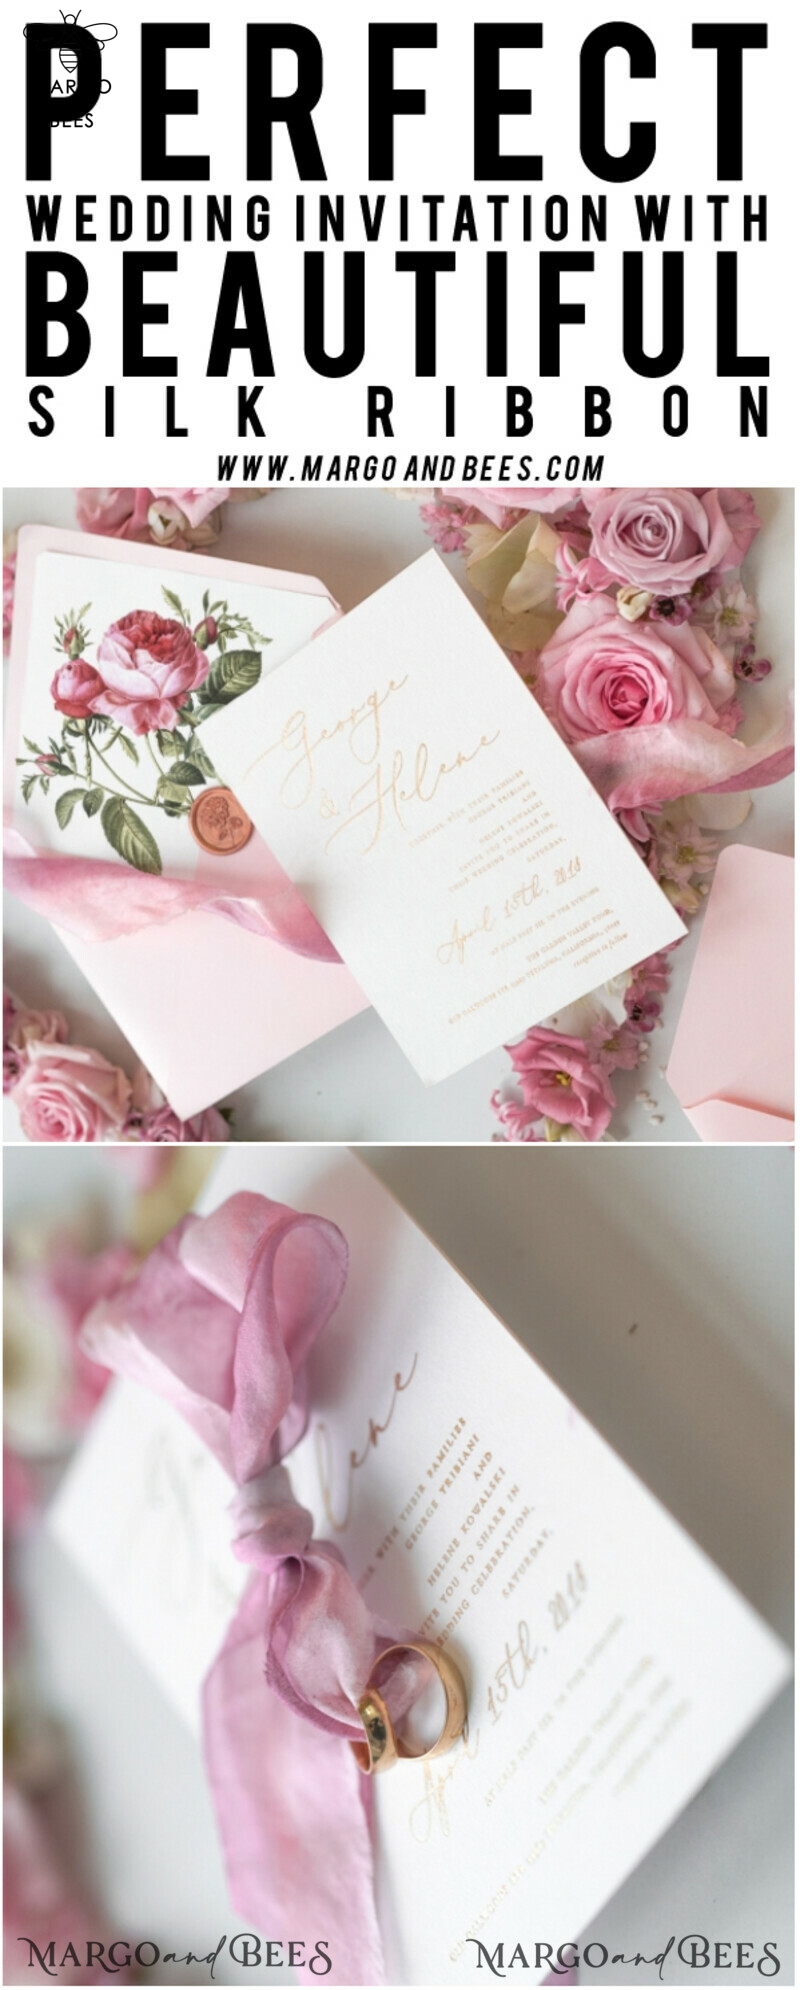 Elegant Personalized Wedding Invitations Romantic Stationery with Vintage Garden Roses and  Handmade Silk Bow Gold Foil Letters  Blush Pink Envelope -49